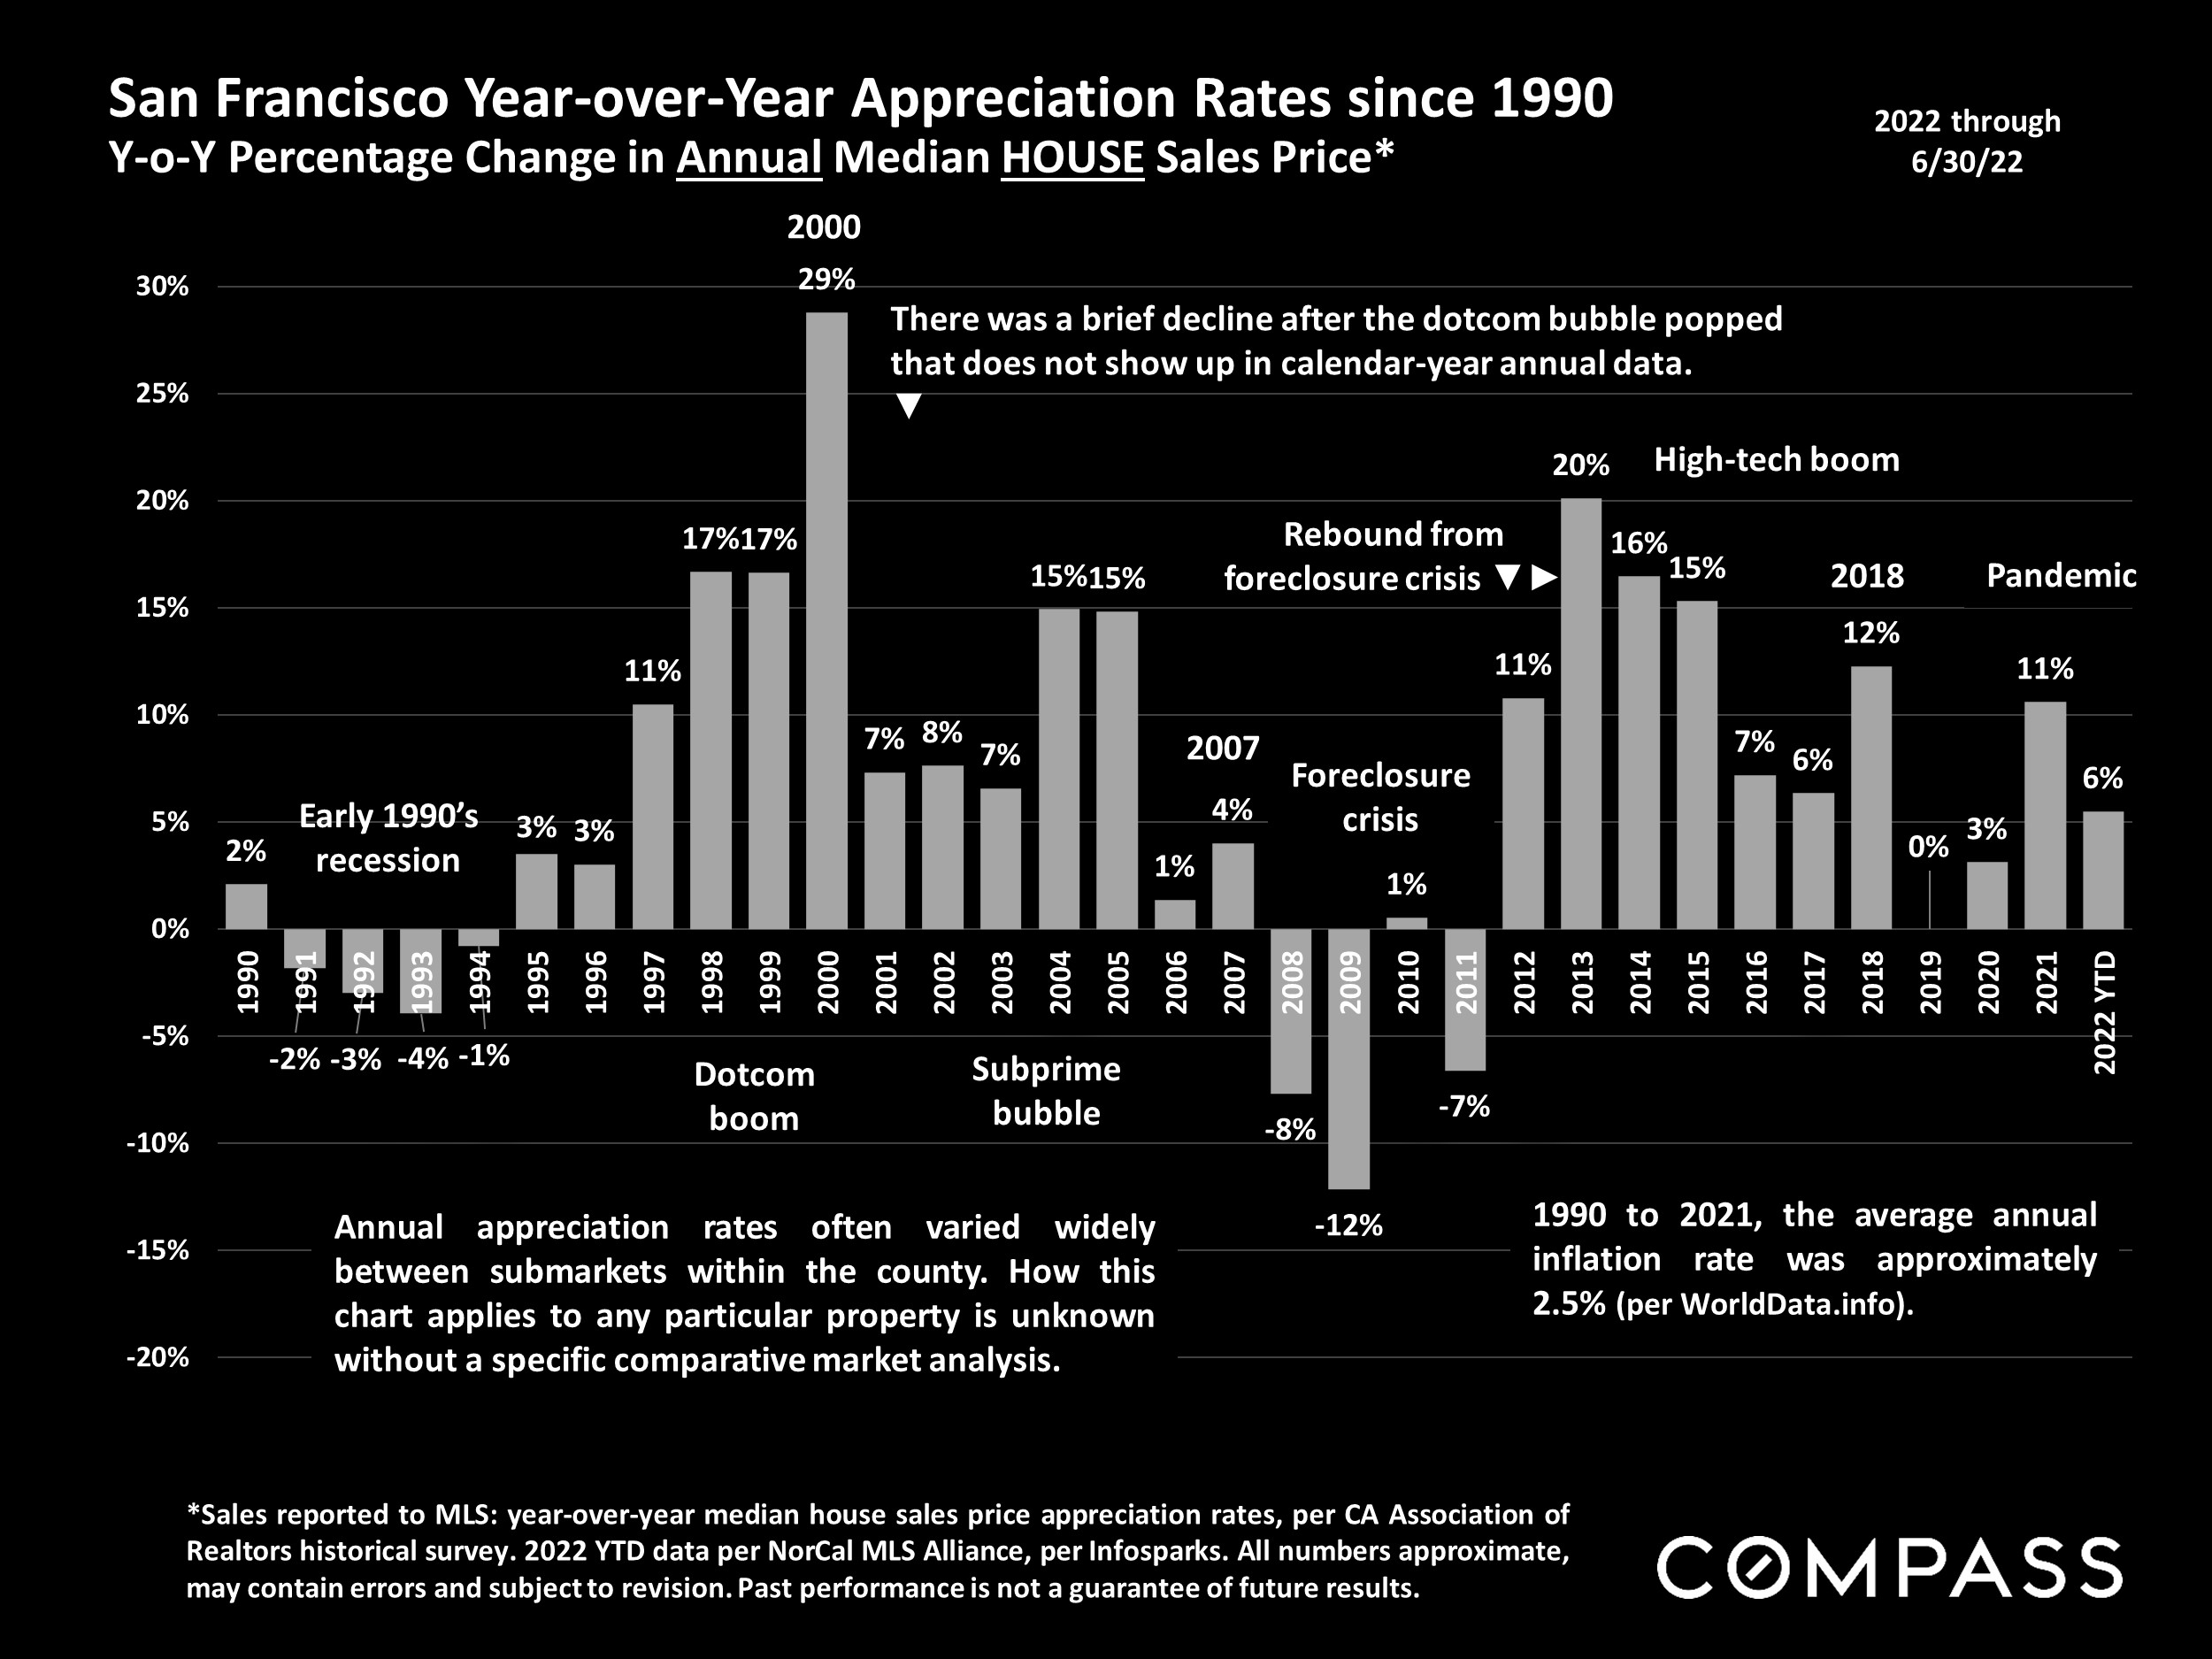 San Francisco Year-over-Year Appreciation Rates since 1990